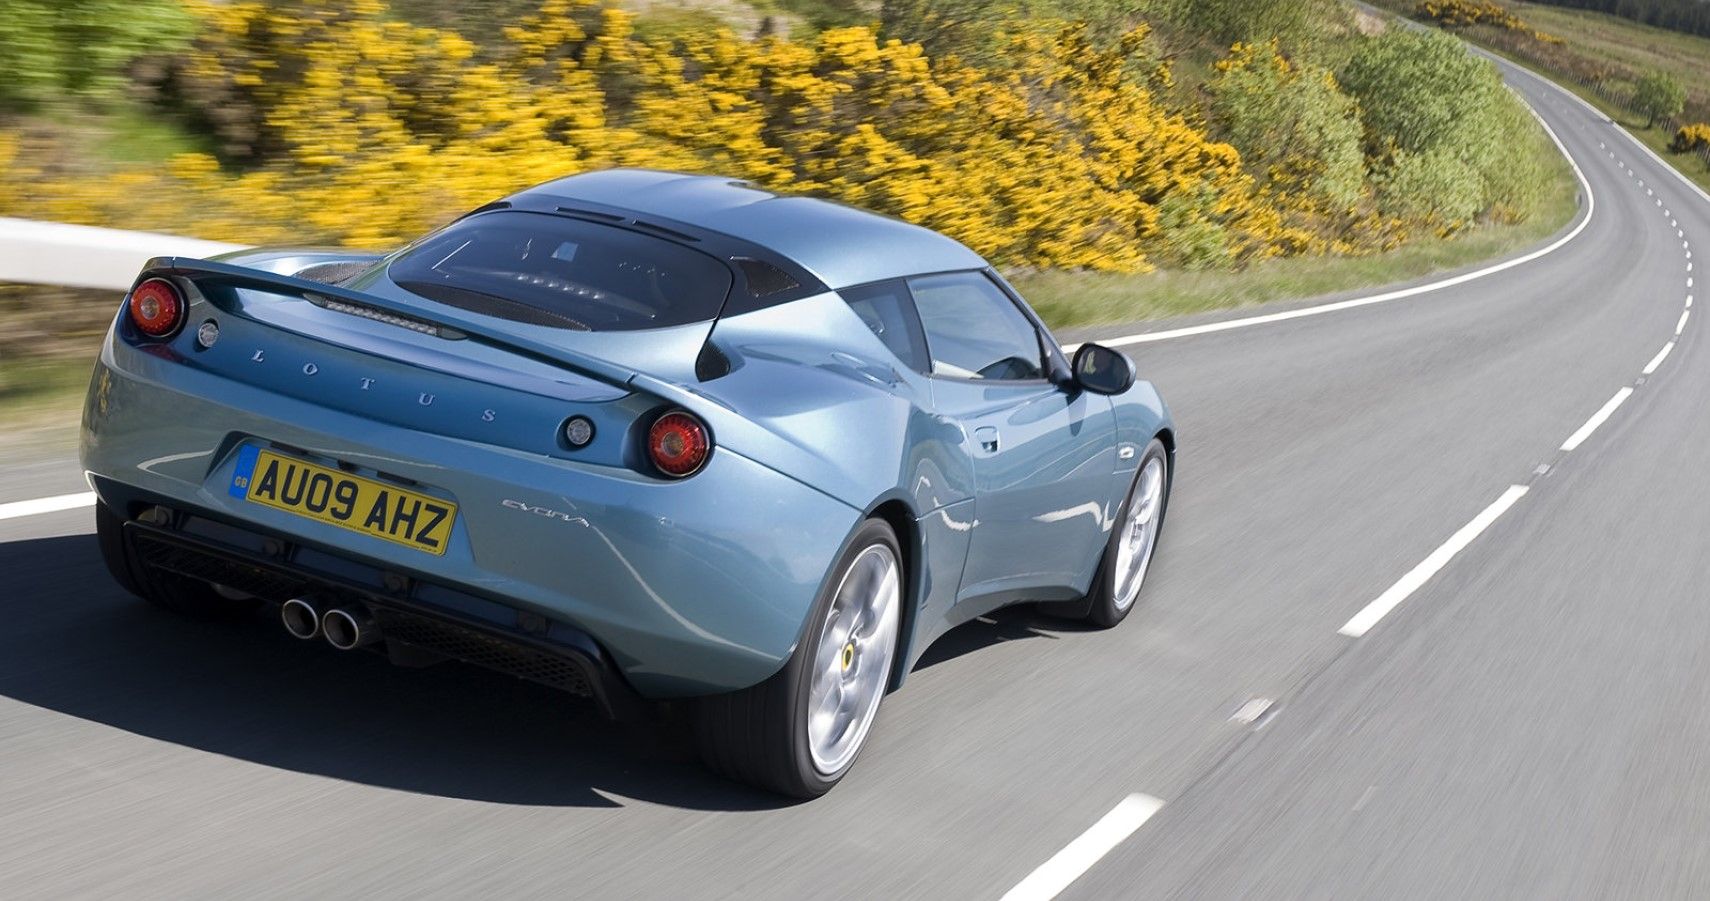 2010 Lotus Evora accelerating on the highway